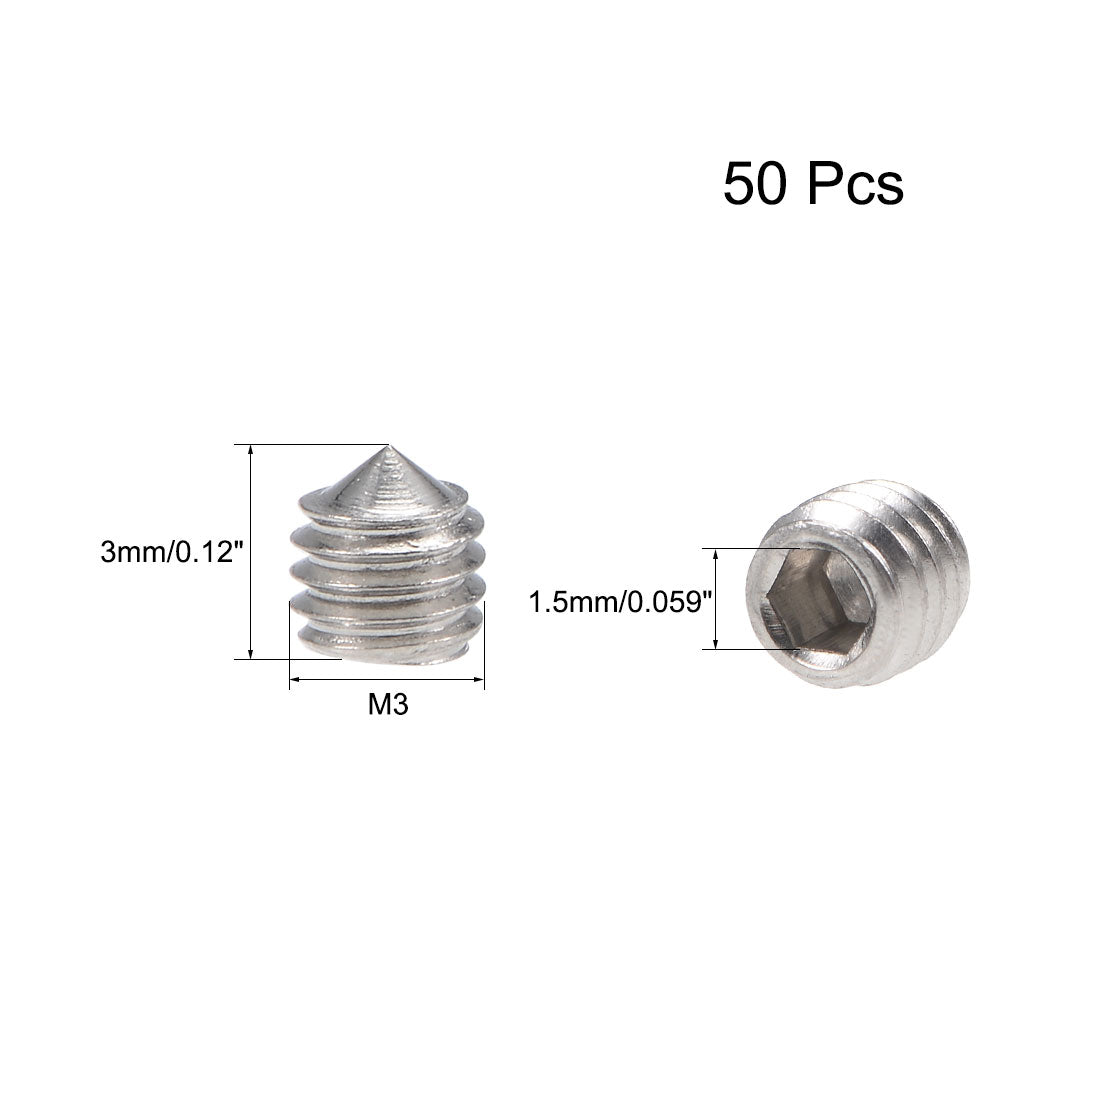 uxcell Uxcell 50Pcs M3x3mm Internal Hex Socket Set Grub Screws Cone Point 304 Stainless Steel Screw